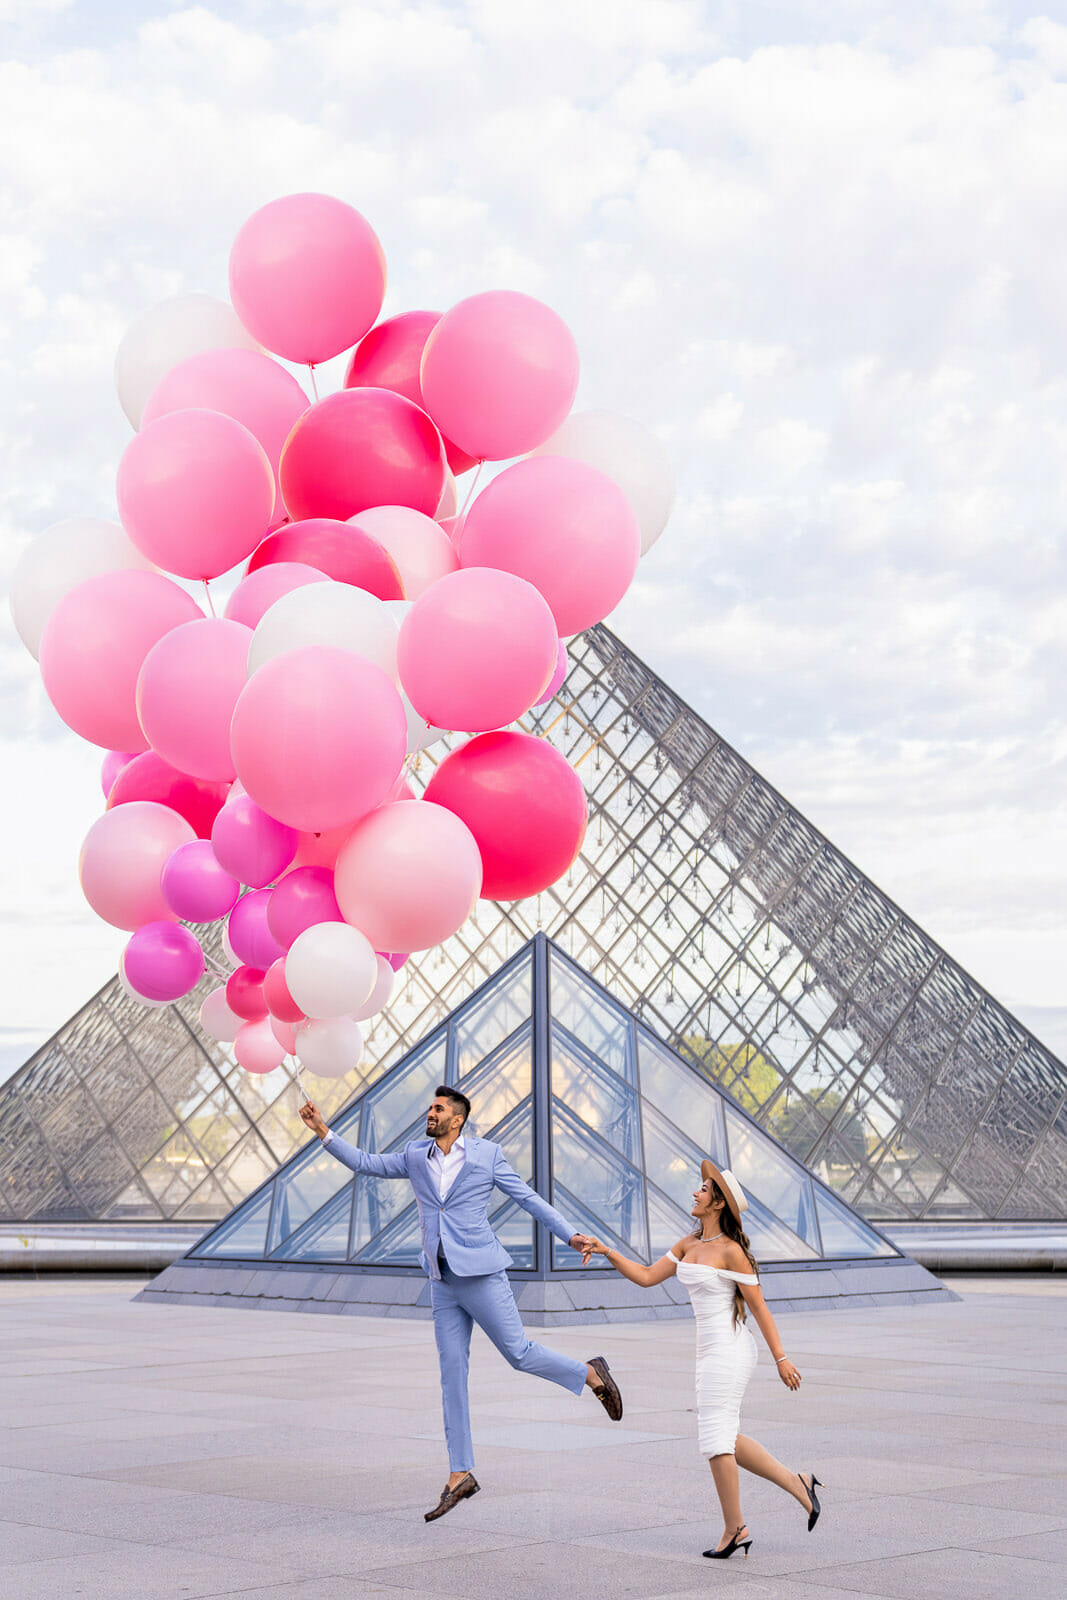 Fun couple photoshoot at the Louvre Museum with massive balloons